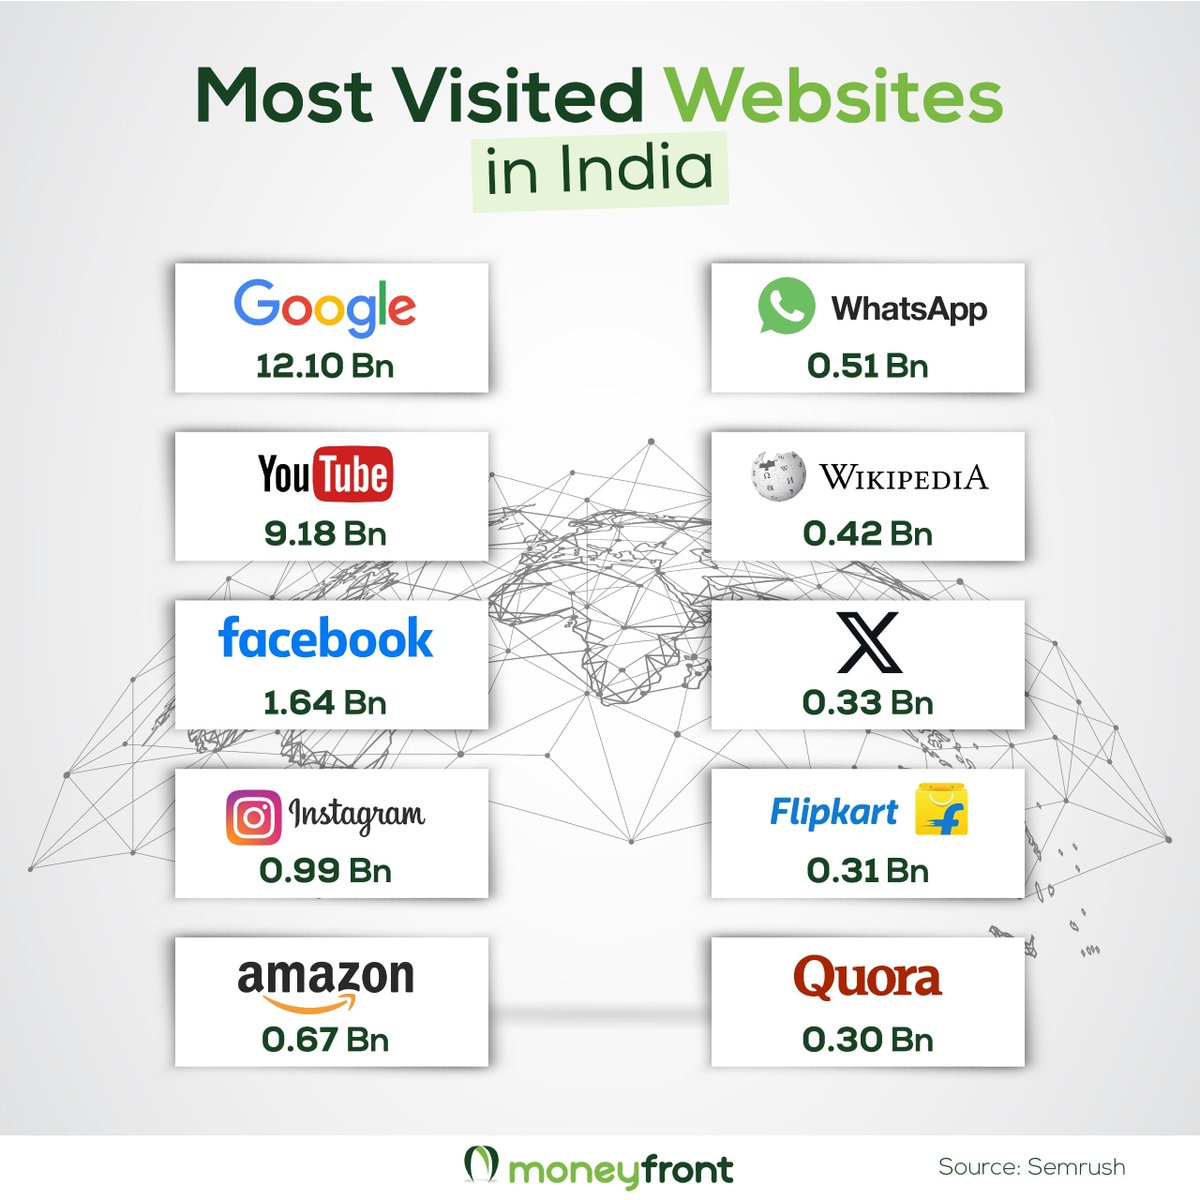 Stay tuned for what Indians are searching for online!

Here's a glimpse into the top visited sites.

#India #websites #internet #browsing #google #youtube #facebook #instagram #socialmedia #webtraffic #websitetraffic #digitallife #webculture #news #funfacts